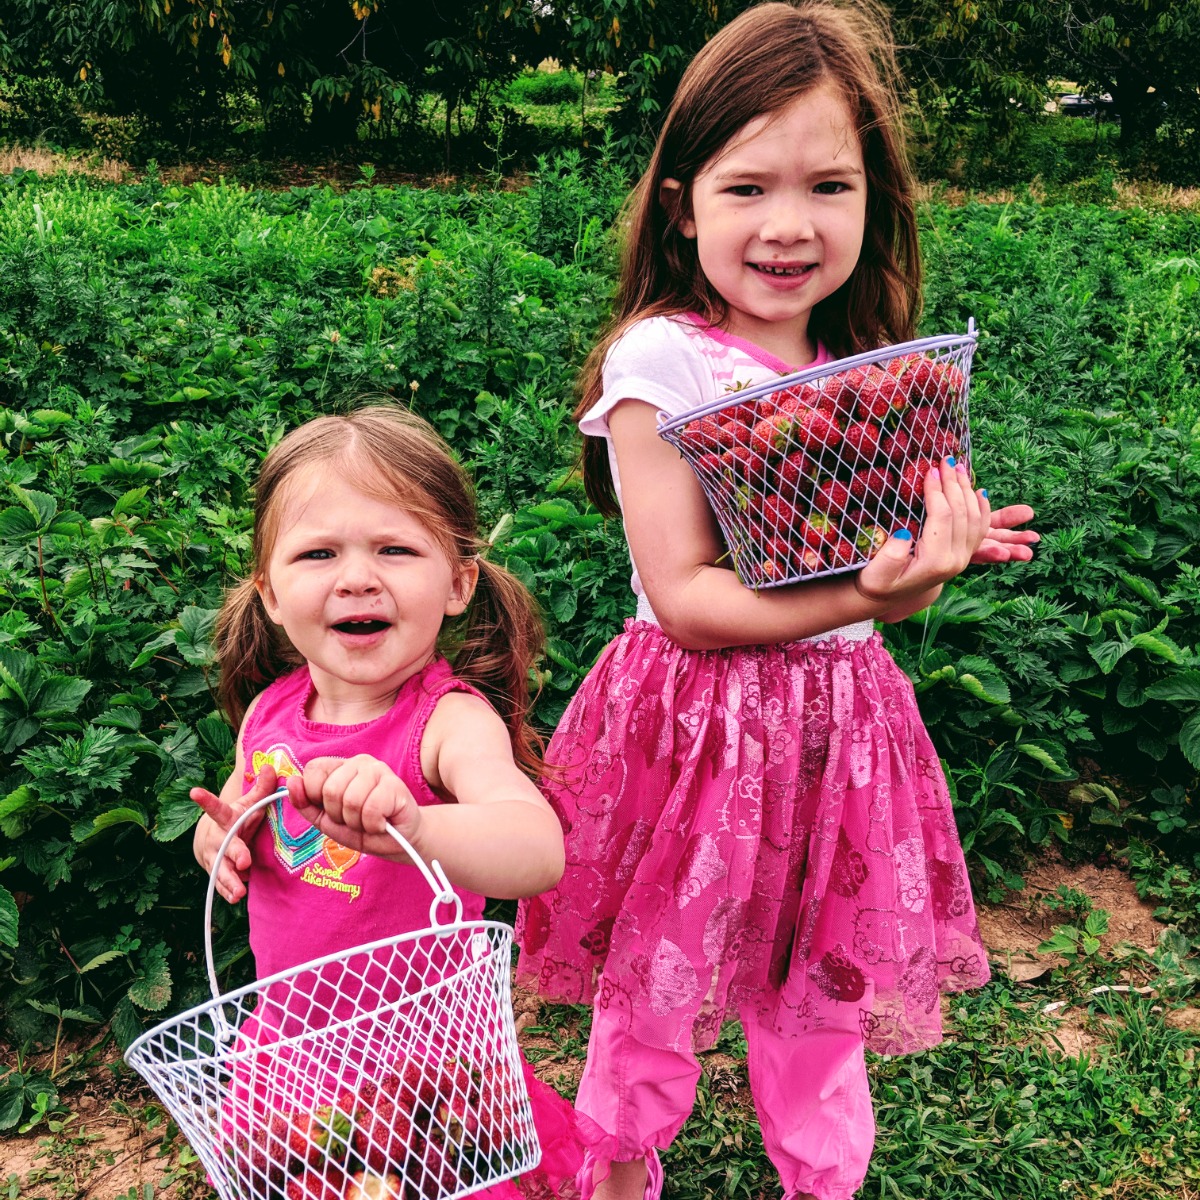 Two sisters picking strawberries - National Picking Strawberries Day is a great time to look for local strawberry farms